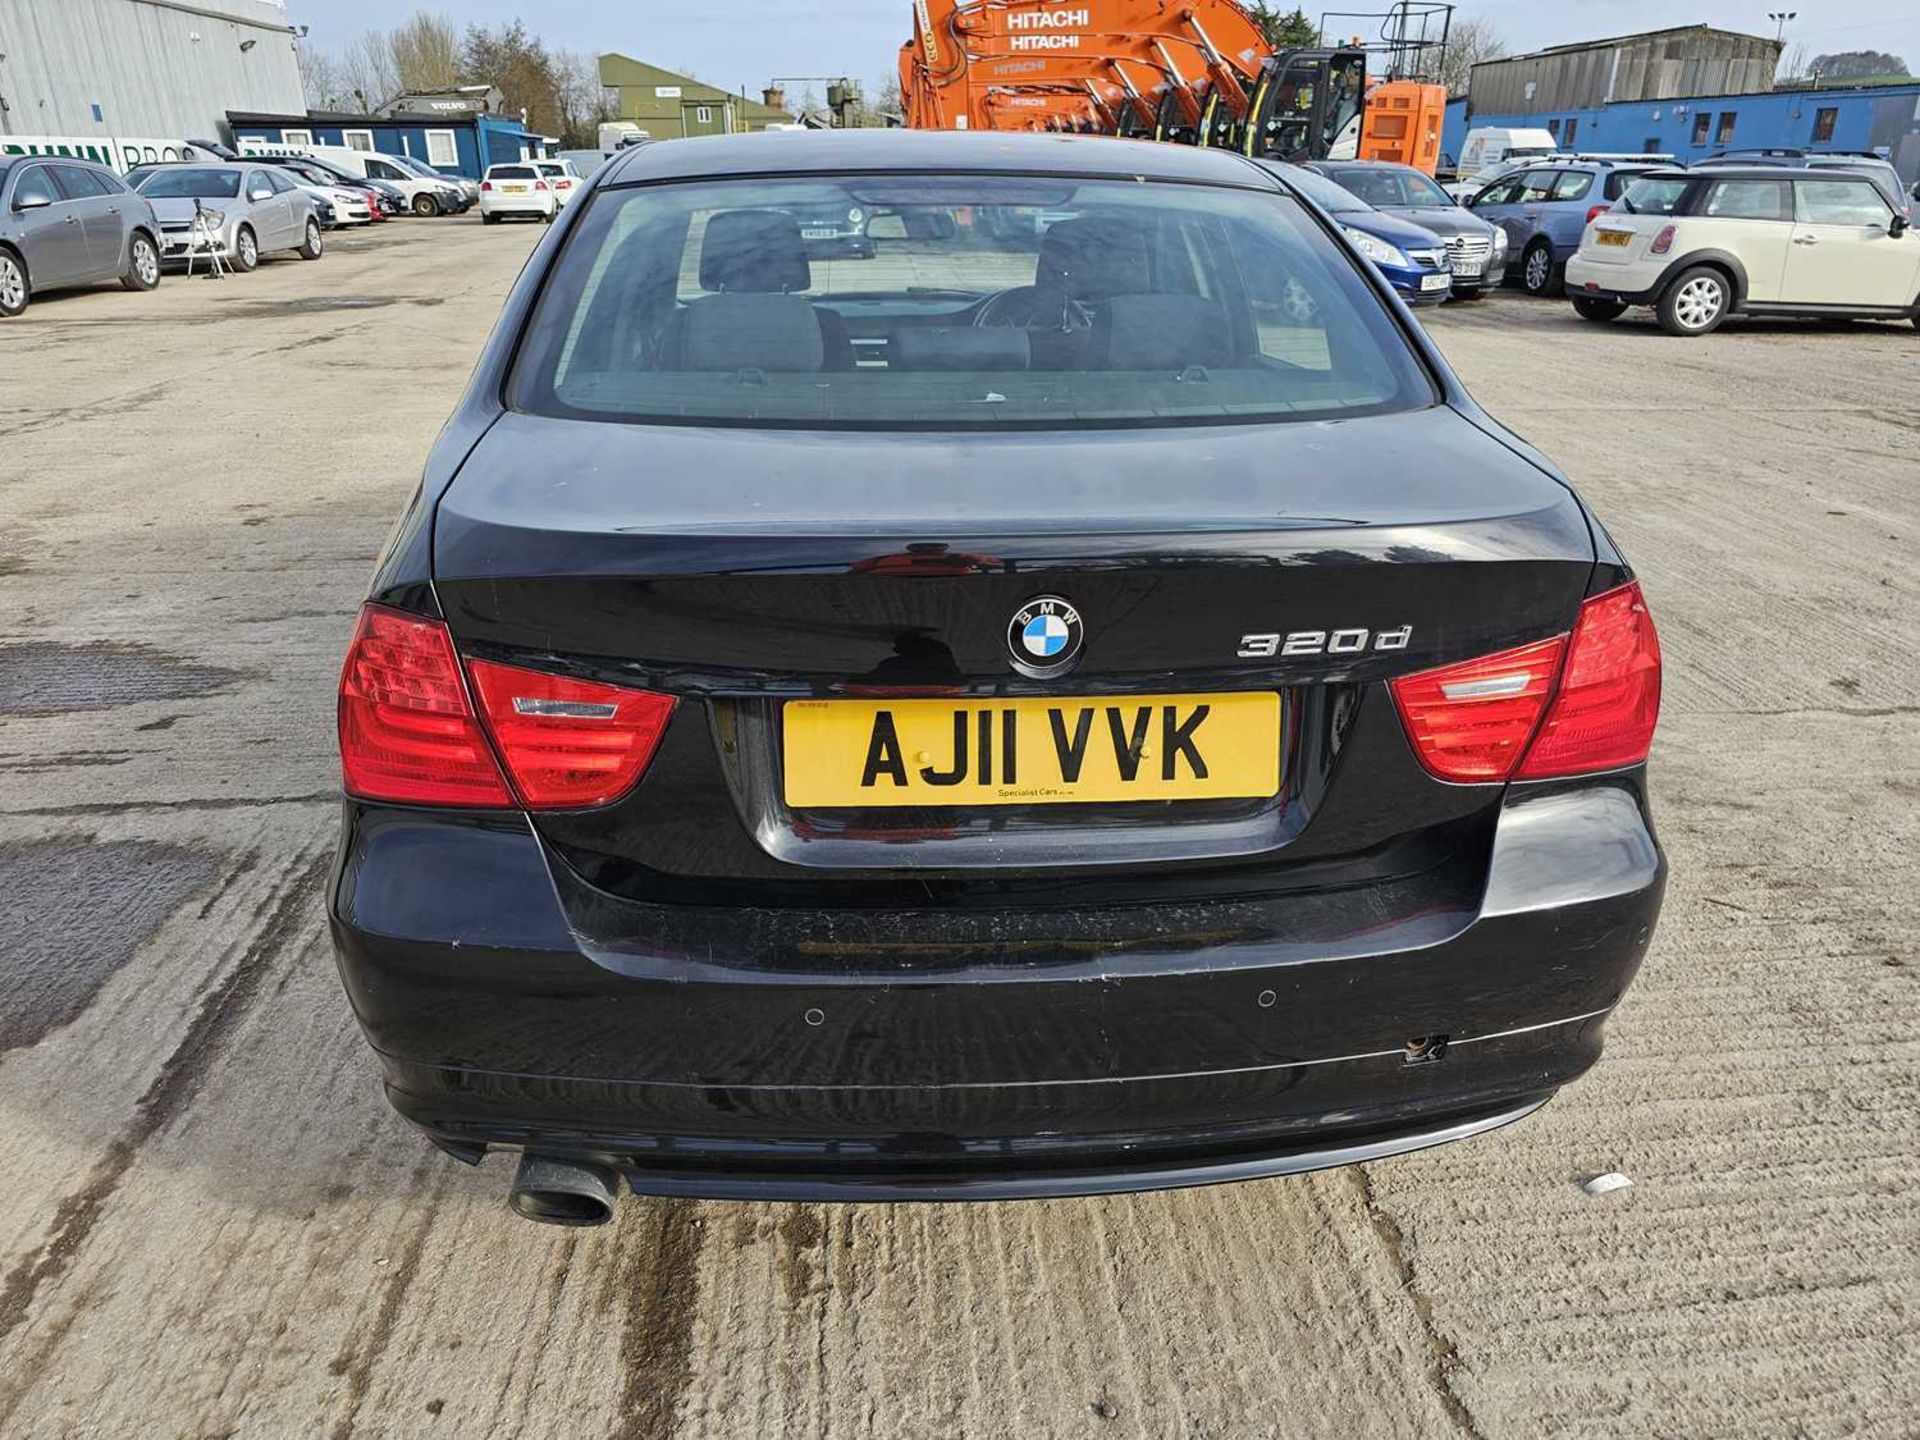 2011 BMW 320D, 6 Speed, Parking Sensors, Bluetooth, A/C (NO VAT)(Reg. Docs. Available, Tested 01/25) - Image 4 of 28